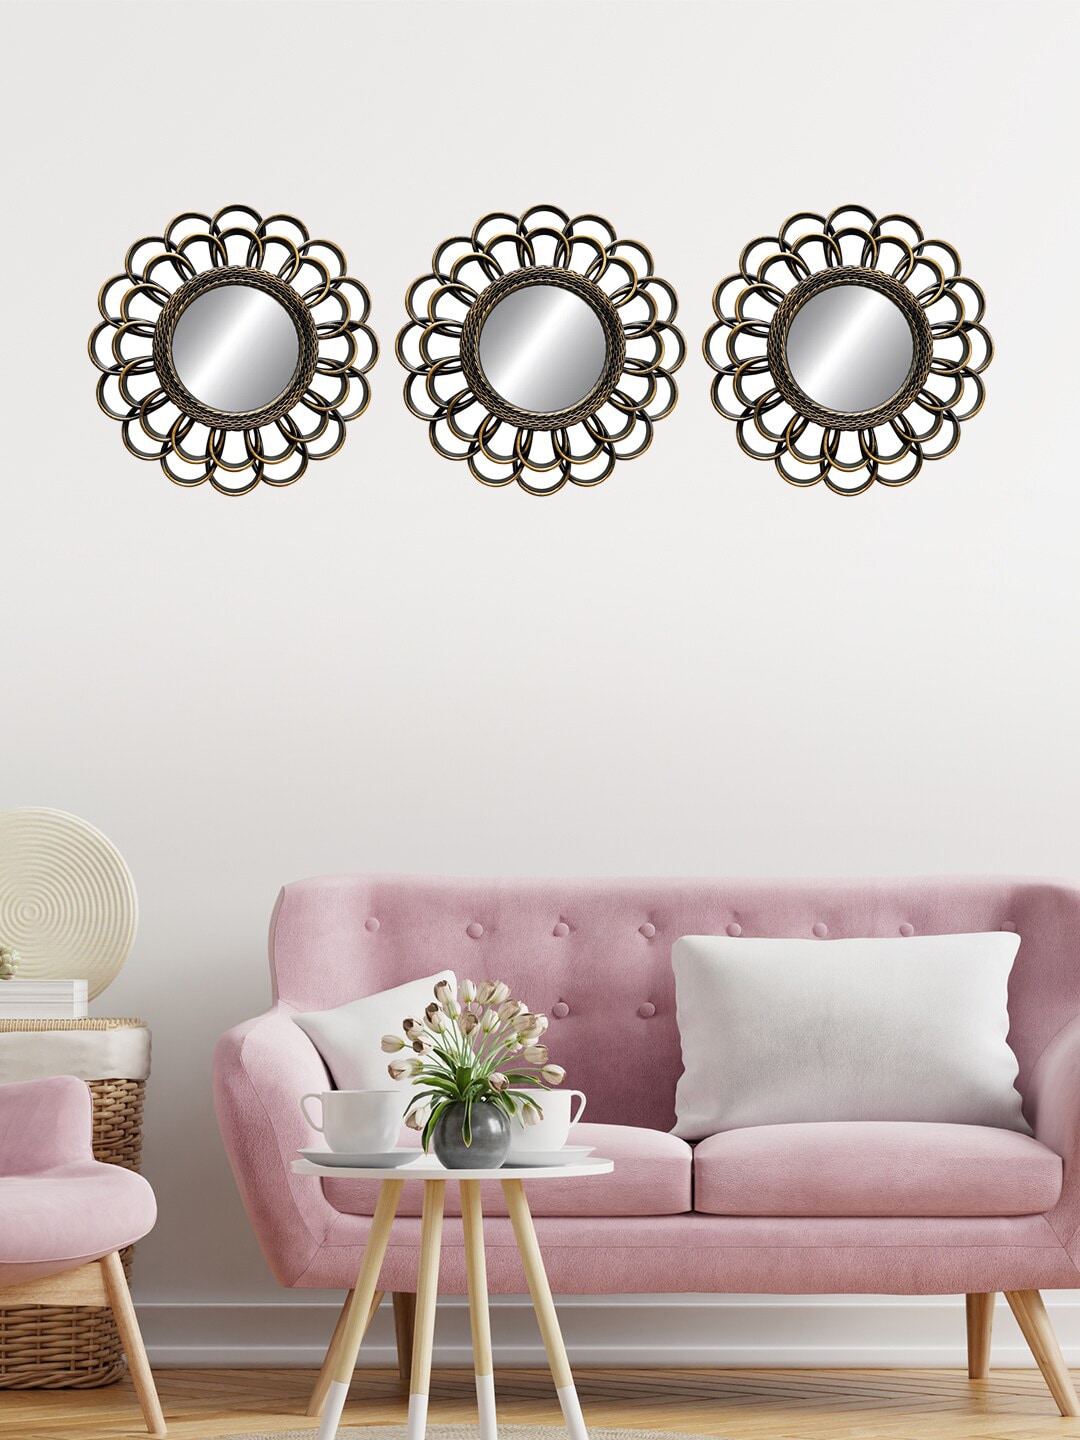 HomeTown Set Of 3 Gold-Toned Mirage Round Decorative Mirrors Price in India